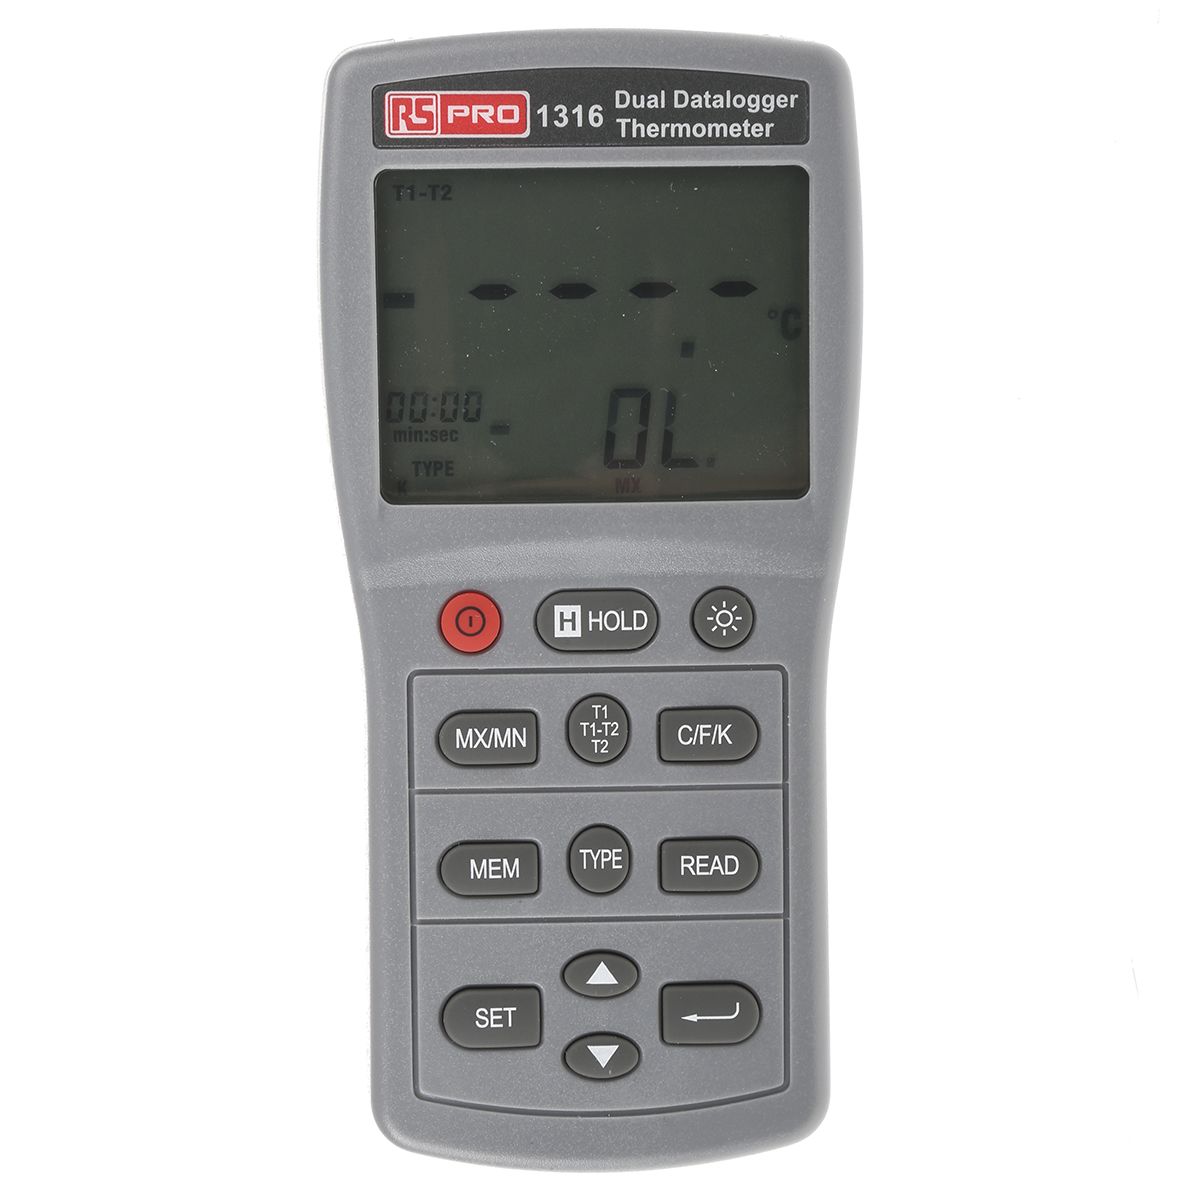 RS PRO 1316 Wired Digital Thermometer, E, J, K, N, R, S, T Probe, 2 Input(s), +1090 (J) °C, +1300 (N) °C, +1370 (K) °C,